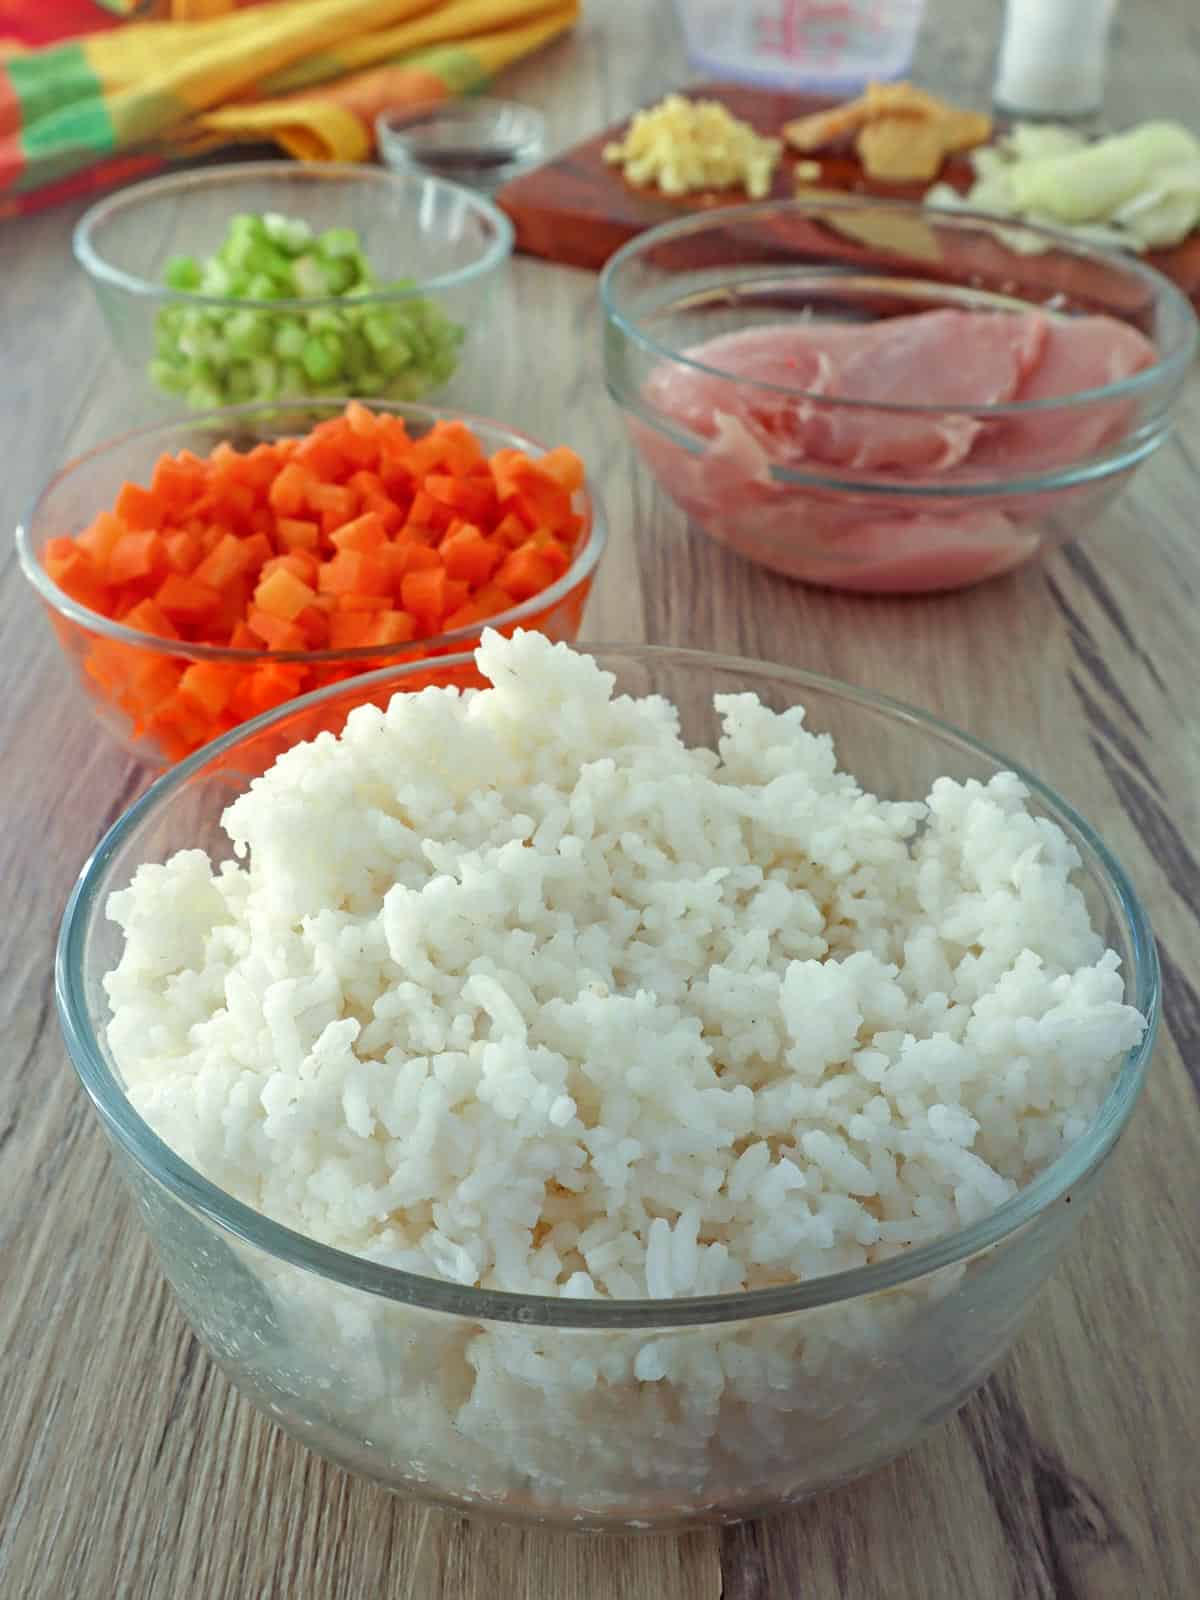 steamed rice, diced carrots, diced celery, uncooked chicken breast, chopped onions in bowls